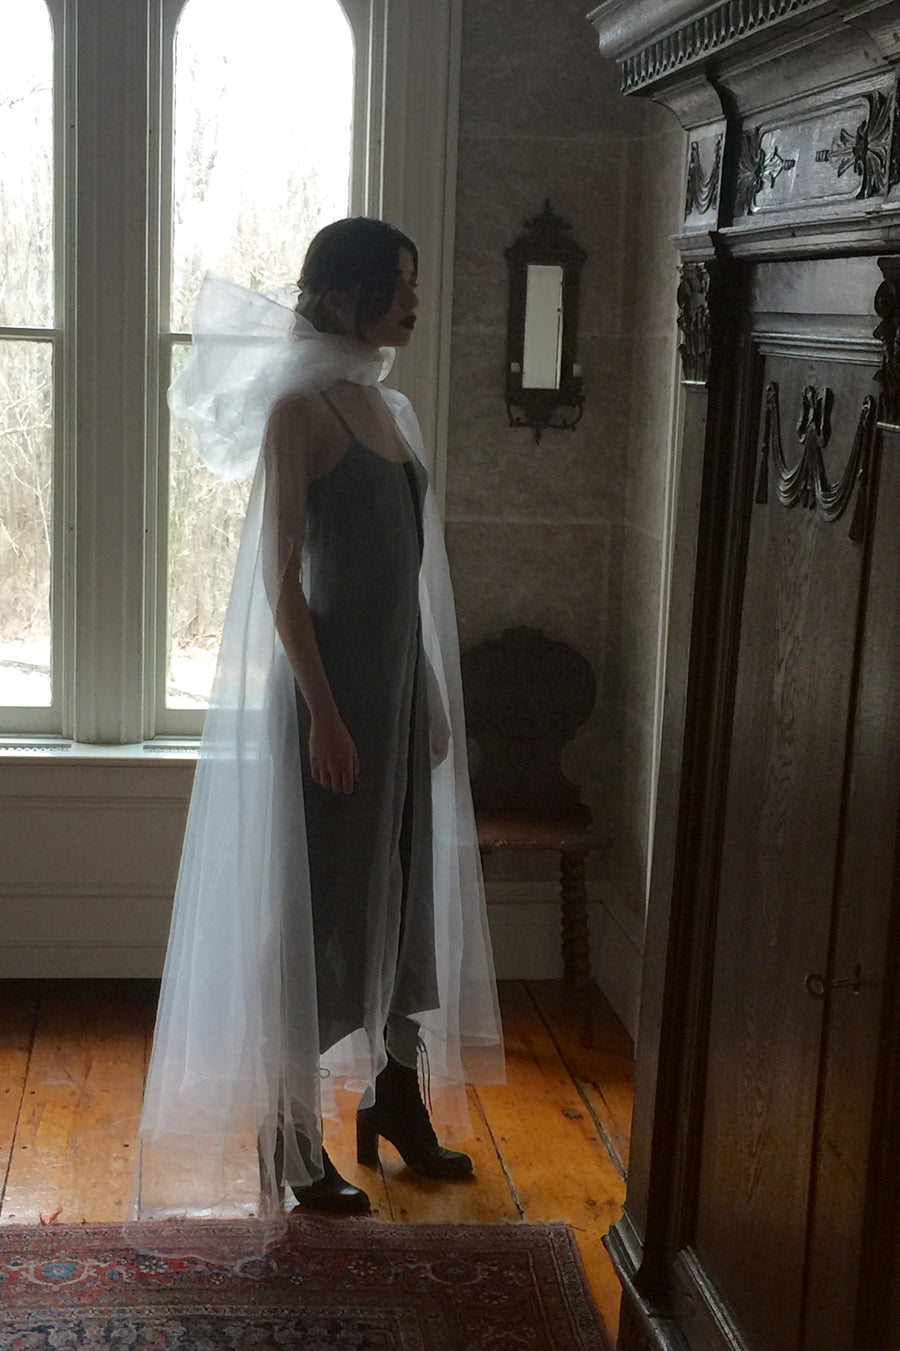 Vanessa M. IMG Model Wendy Nichol Clothing Designer Made to Order Custom Tailoring Made to Measure Handmade in NYC New York City Fashion Runway Show AW16 13 Incarnations White Ghost Edwardian Sheer Organza Hooded Hood Cape Cloak Satin Bow Bride Wedding Veil cover Victorian Edwardian Gothic sheer chiffon Ruche Ankle Jumper Jumpsuit Summer 